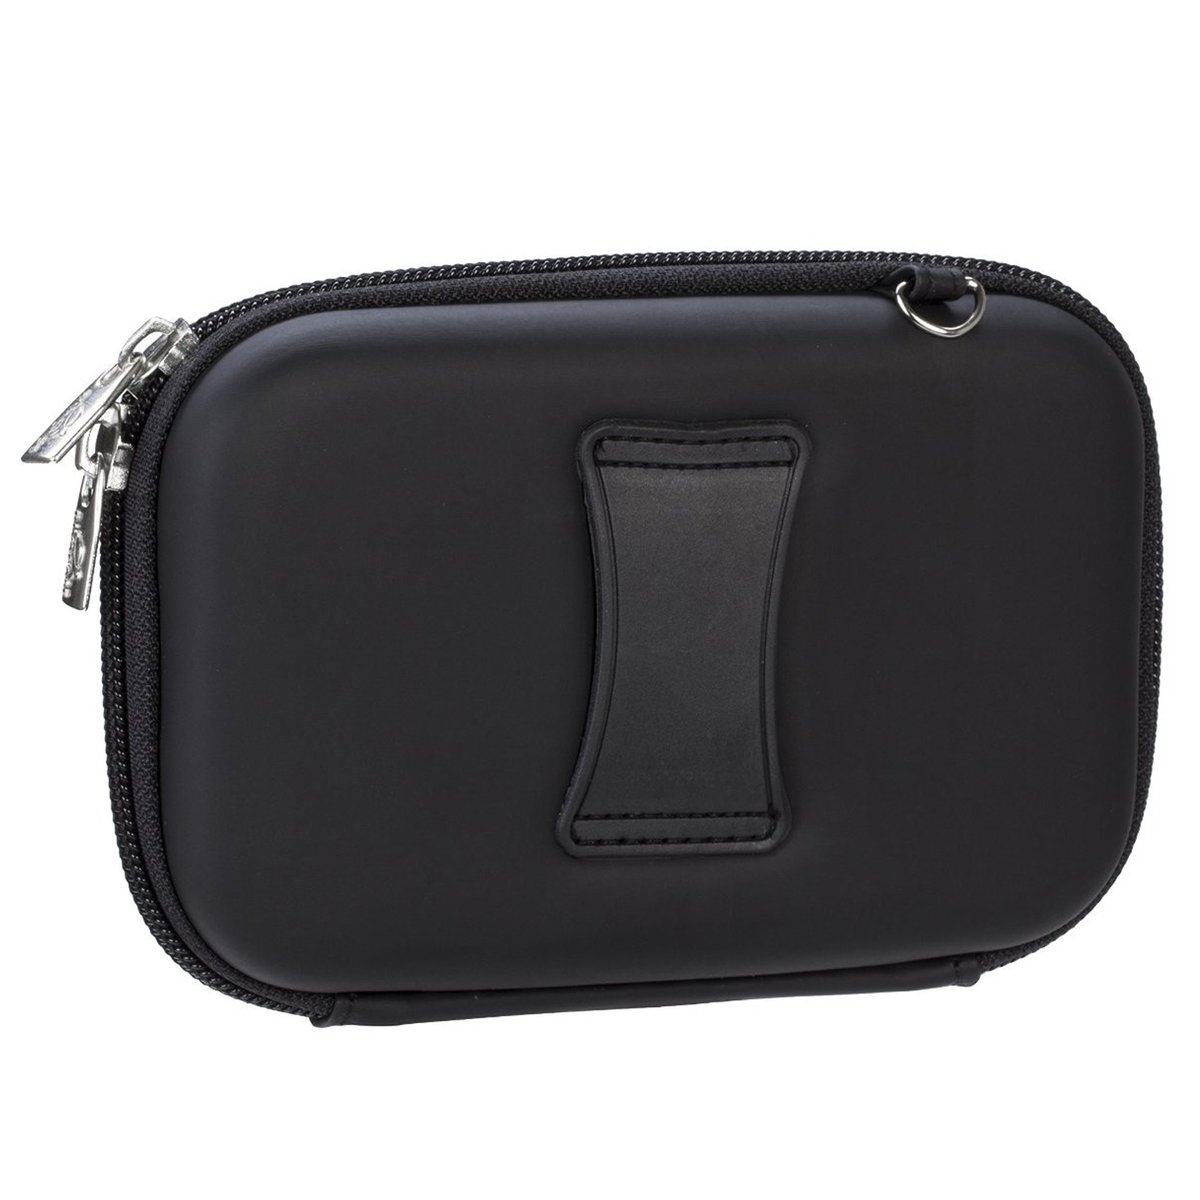 Rivacase Portable Hard Drive or GPS Case 2.5inch 9101